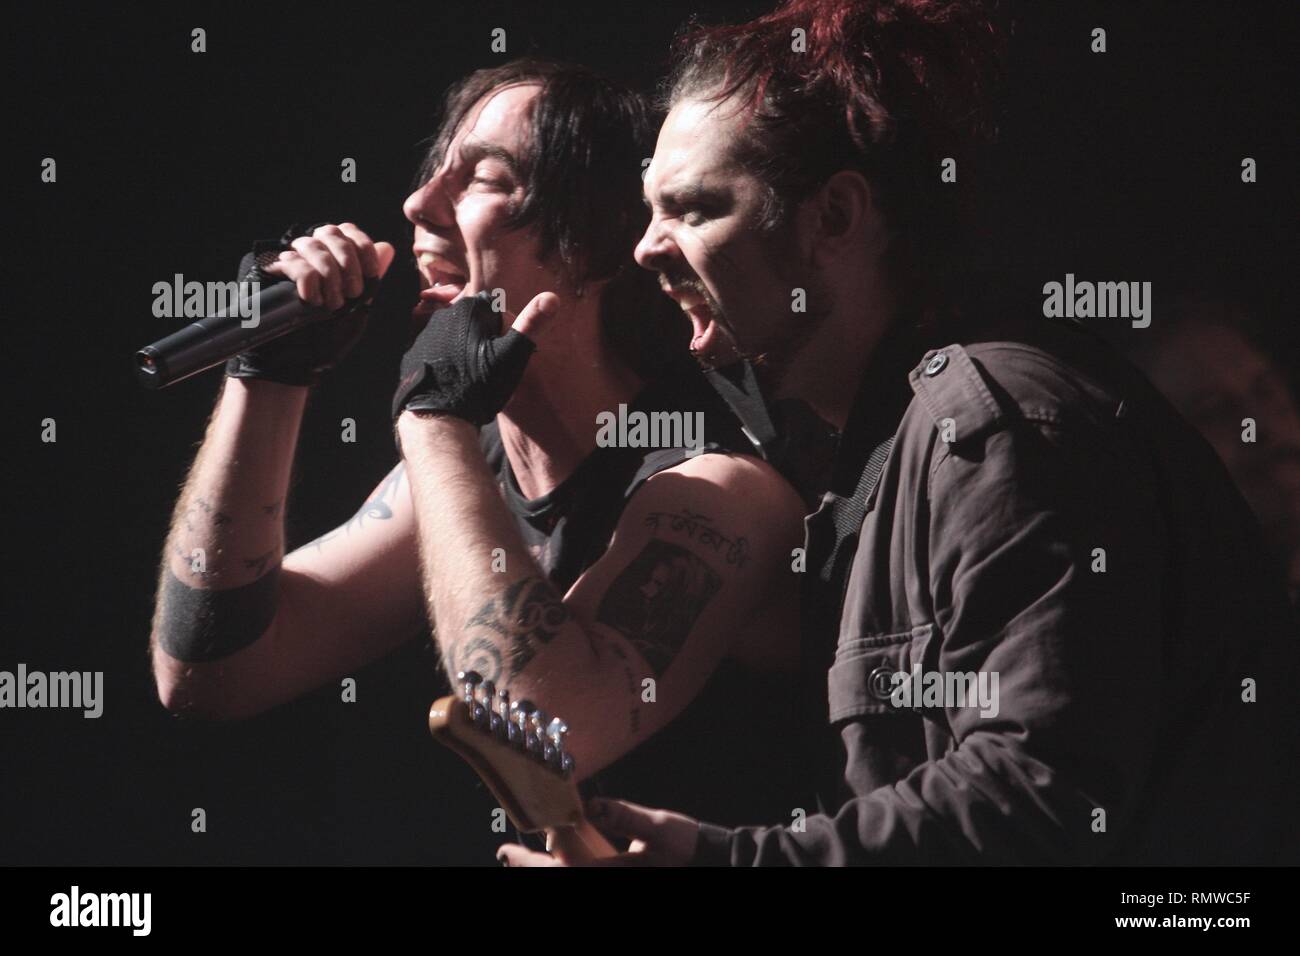 Singer Adam Gontier along with his guitarist of the alternative rock band Three Days Grace are shown performing on stage during a 'live' concert appearance. Stock Photo